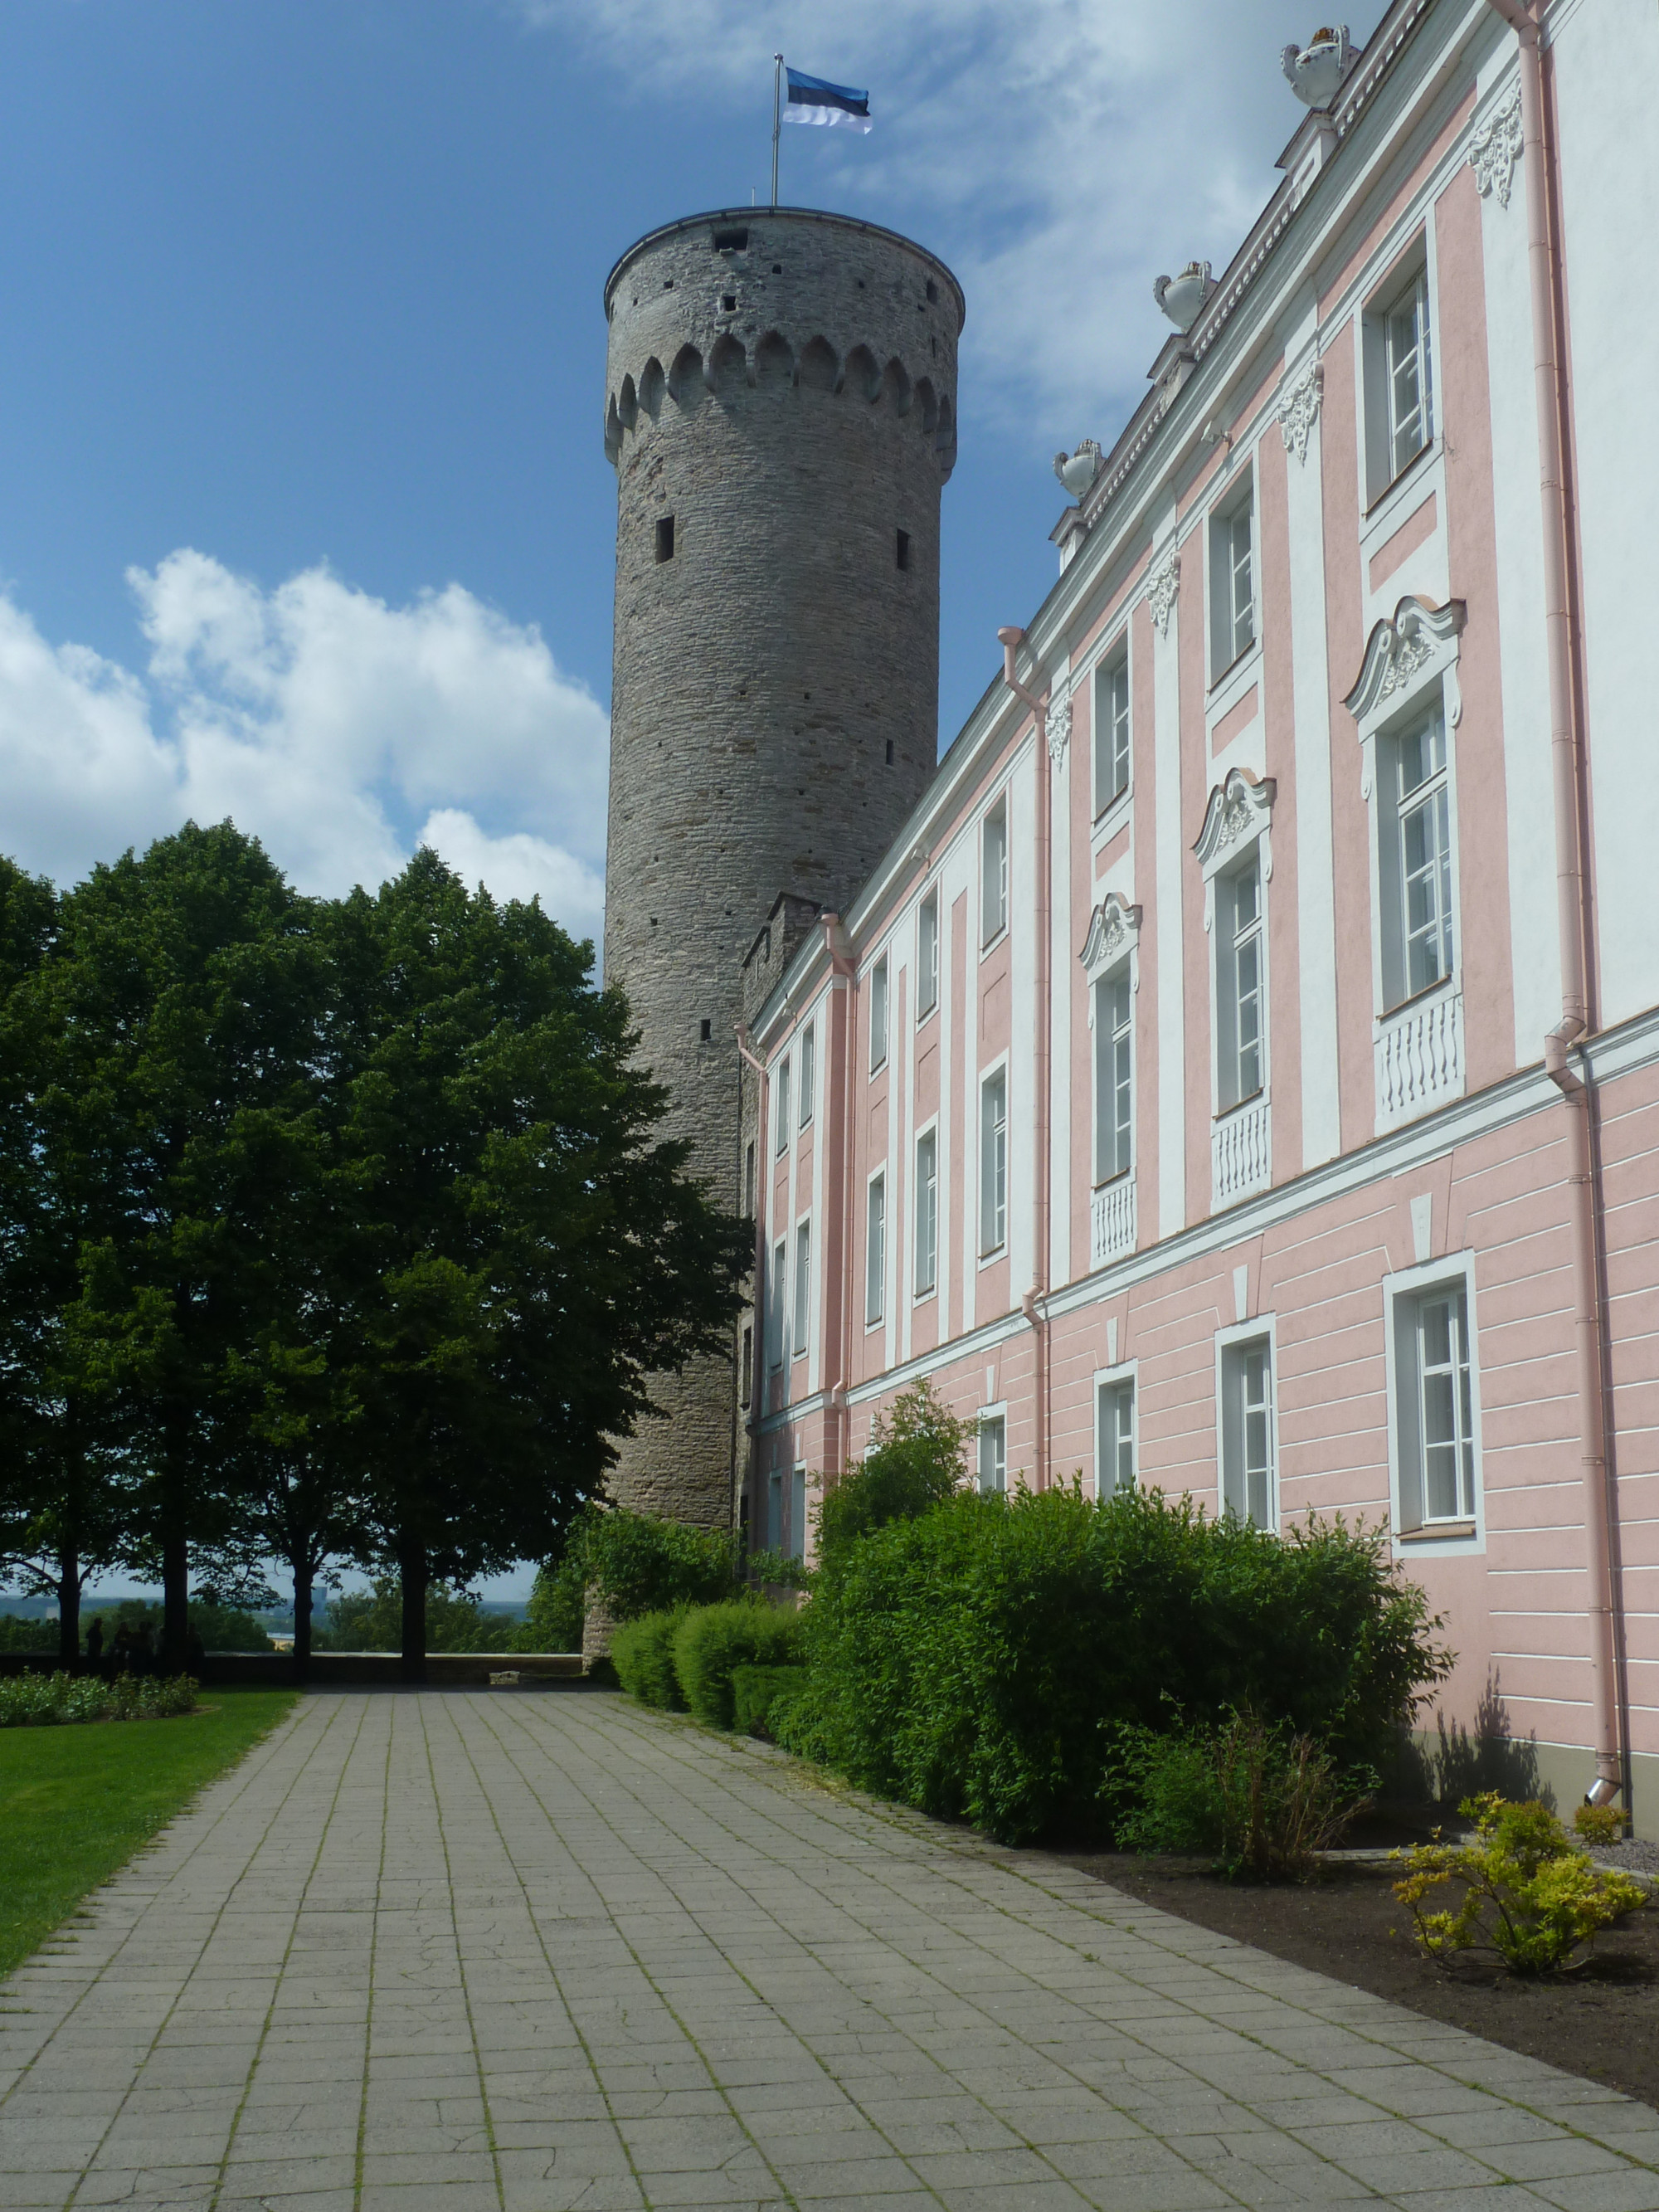 Tall Hermann Tower adjacent to pink Toompae Palace, home of the Estonian parliament